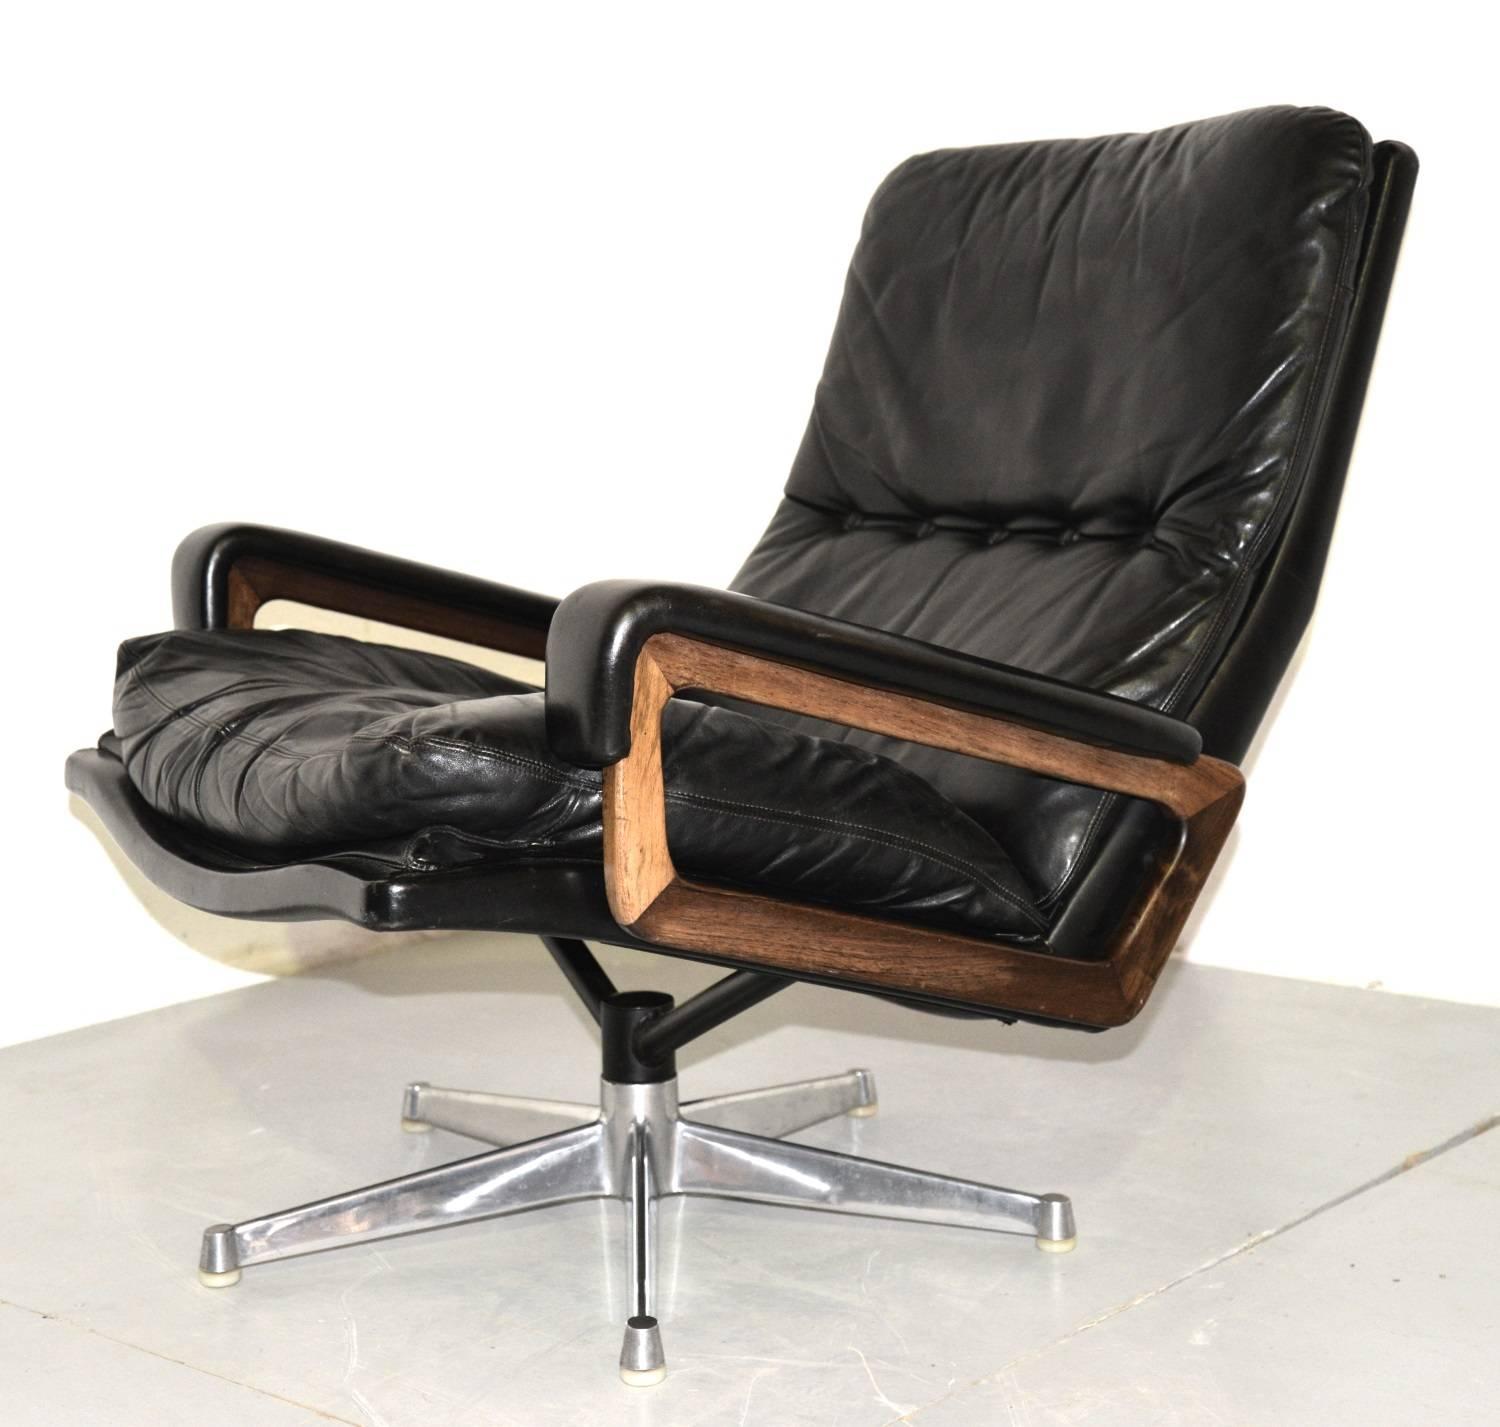 Discounted airfreight for our US and International customers ( from 2 weeks door to door)

We are delighted to bring to you a vintage lounge King armchair by Strassle of Switzerland. Designed by Andre Vandenbeuck of Belgium, the swivel lounge